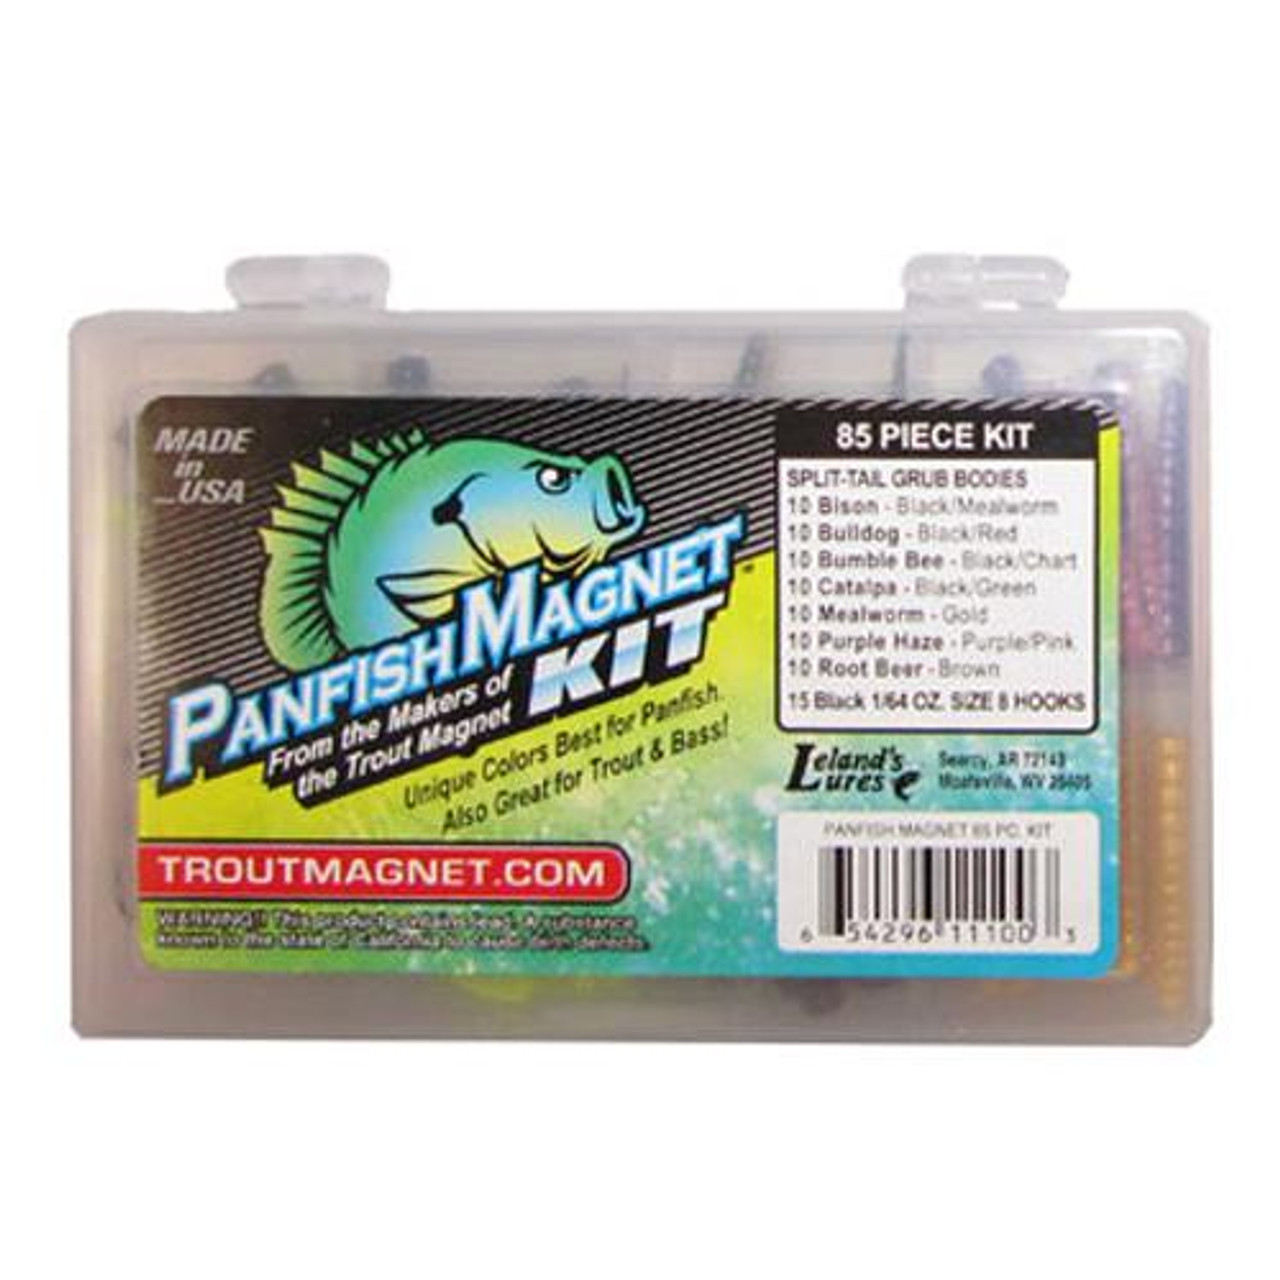 Trout Magnet 82 Piece Neon Fishing Kit, Catches All Types of Fish